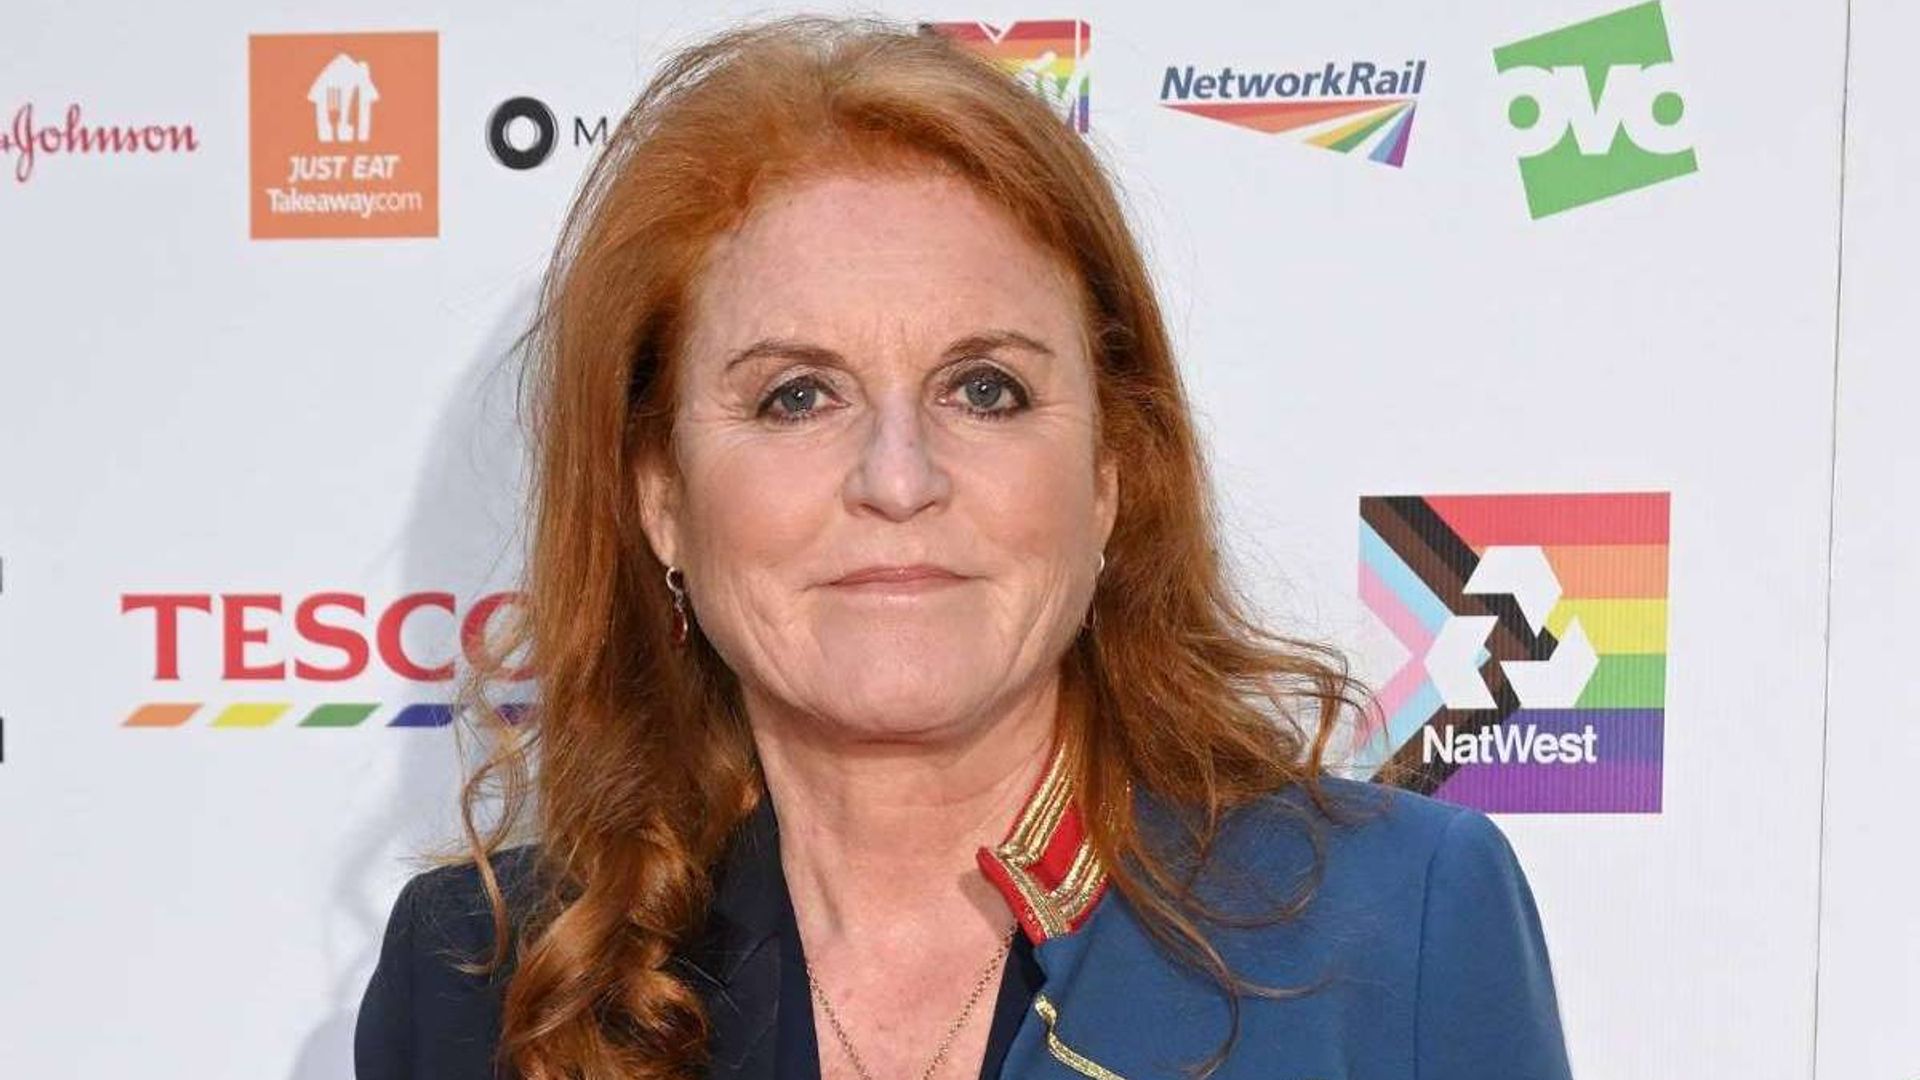 Sarah Ferguson flooded with support as she issues heartfelt message